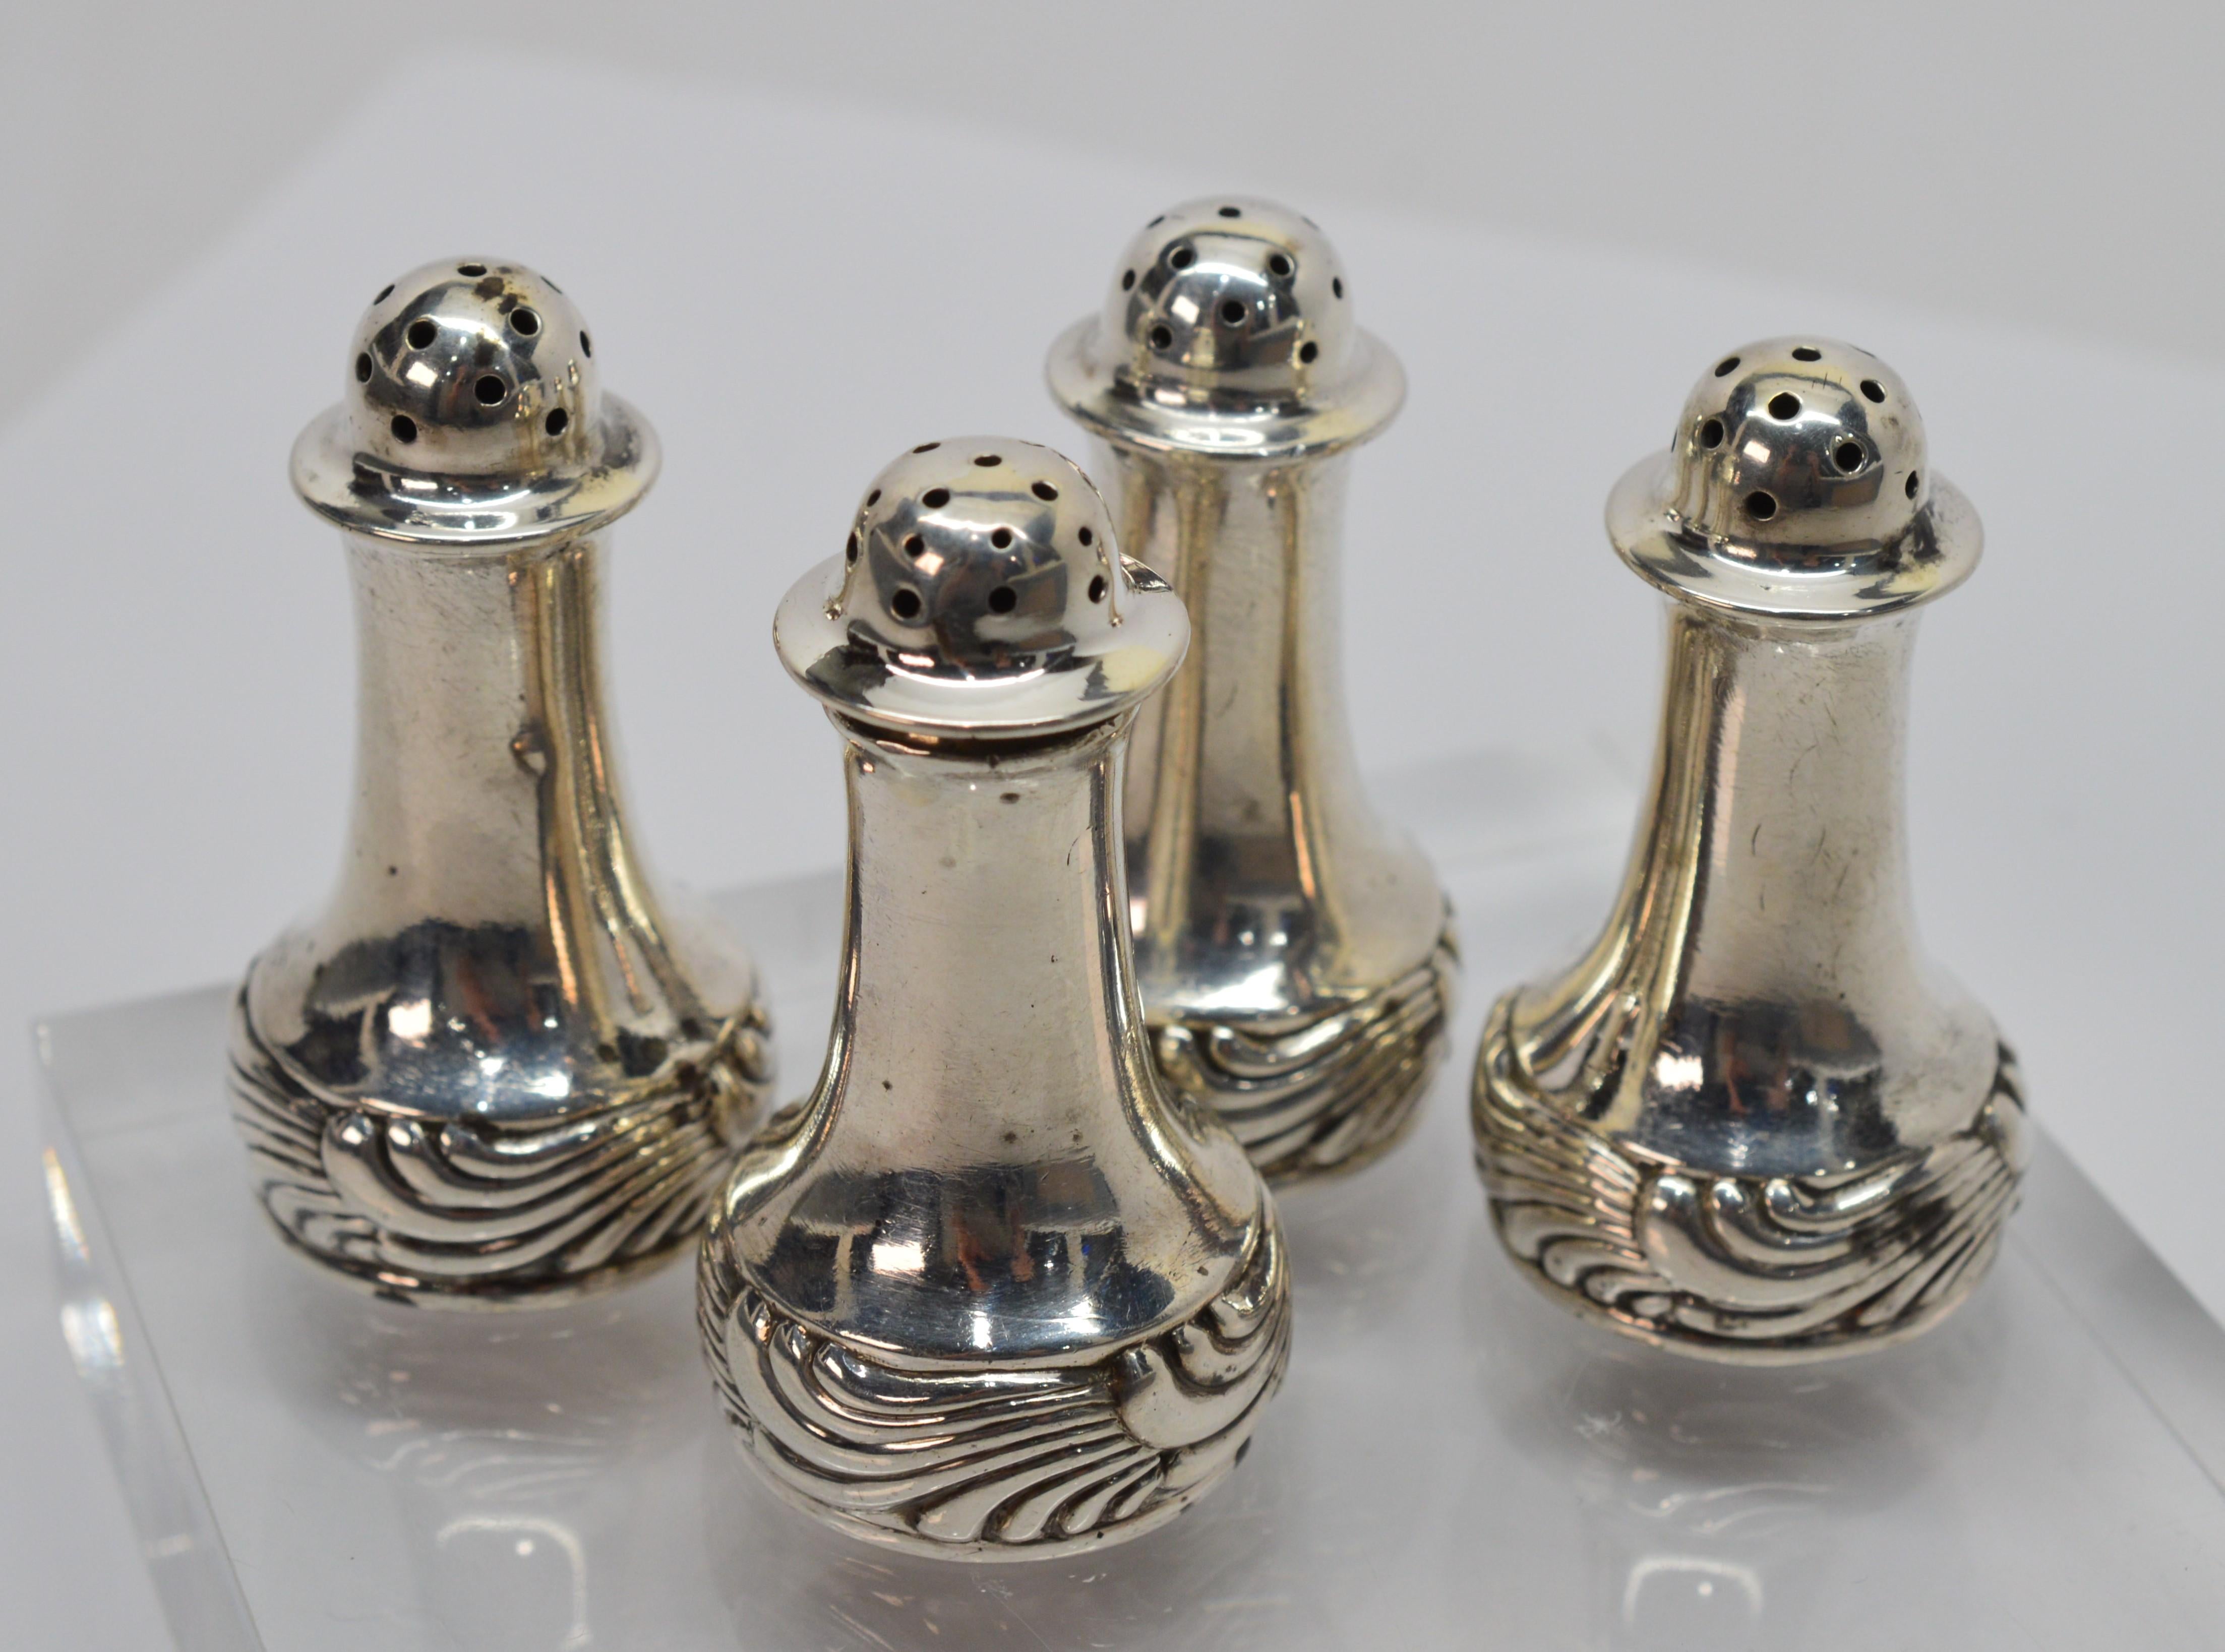 Set your table in style with two pair of vintage Tiffany & Co. salt and pepper shakers. This early 20th century set of four sterling silver shakers is decorated with an attractive scroll design that would complement any dinnerware style. The shakers